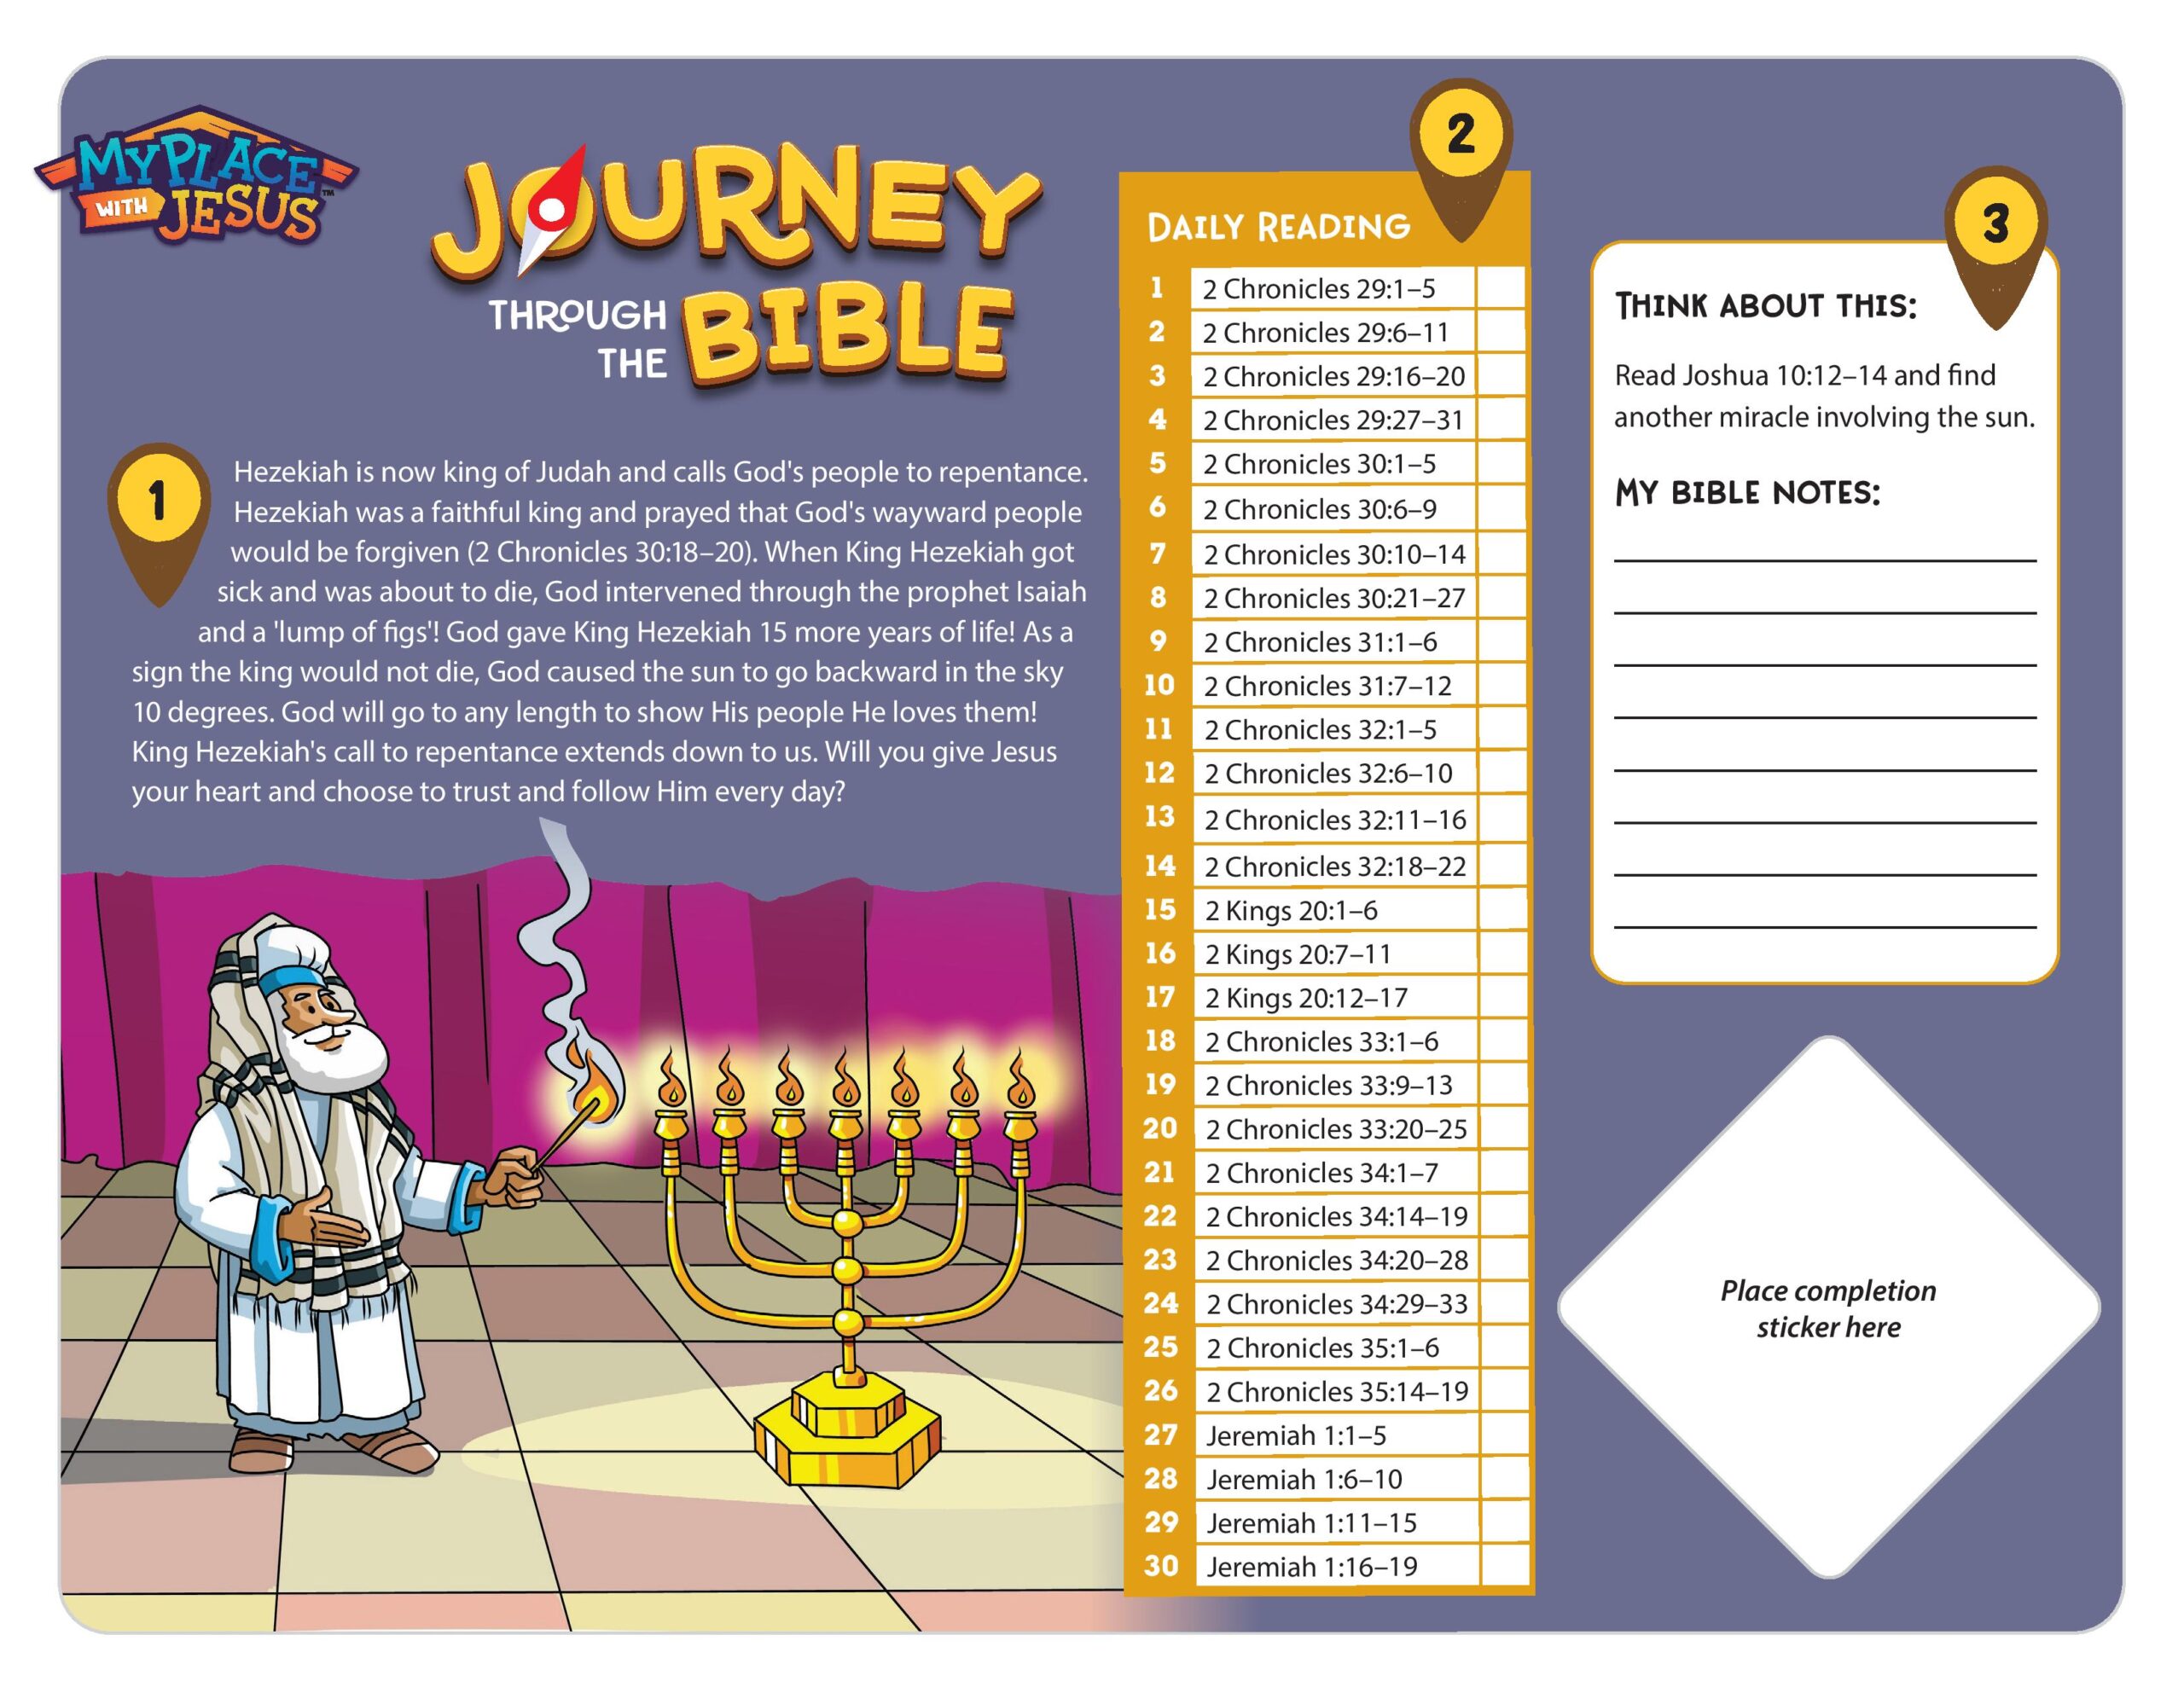 Journey Through the Bible 24